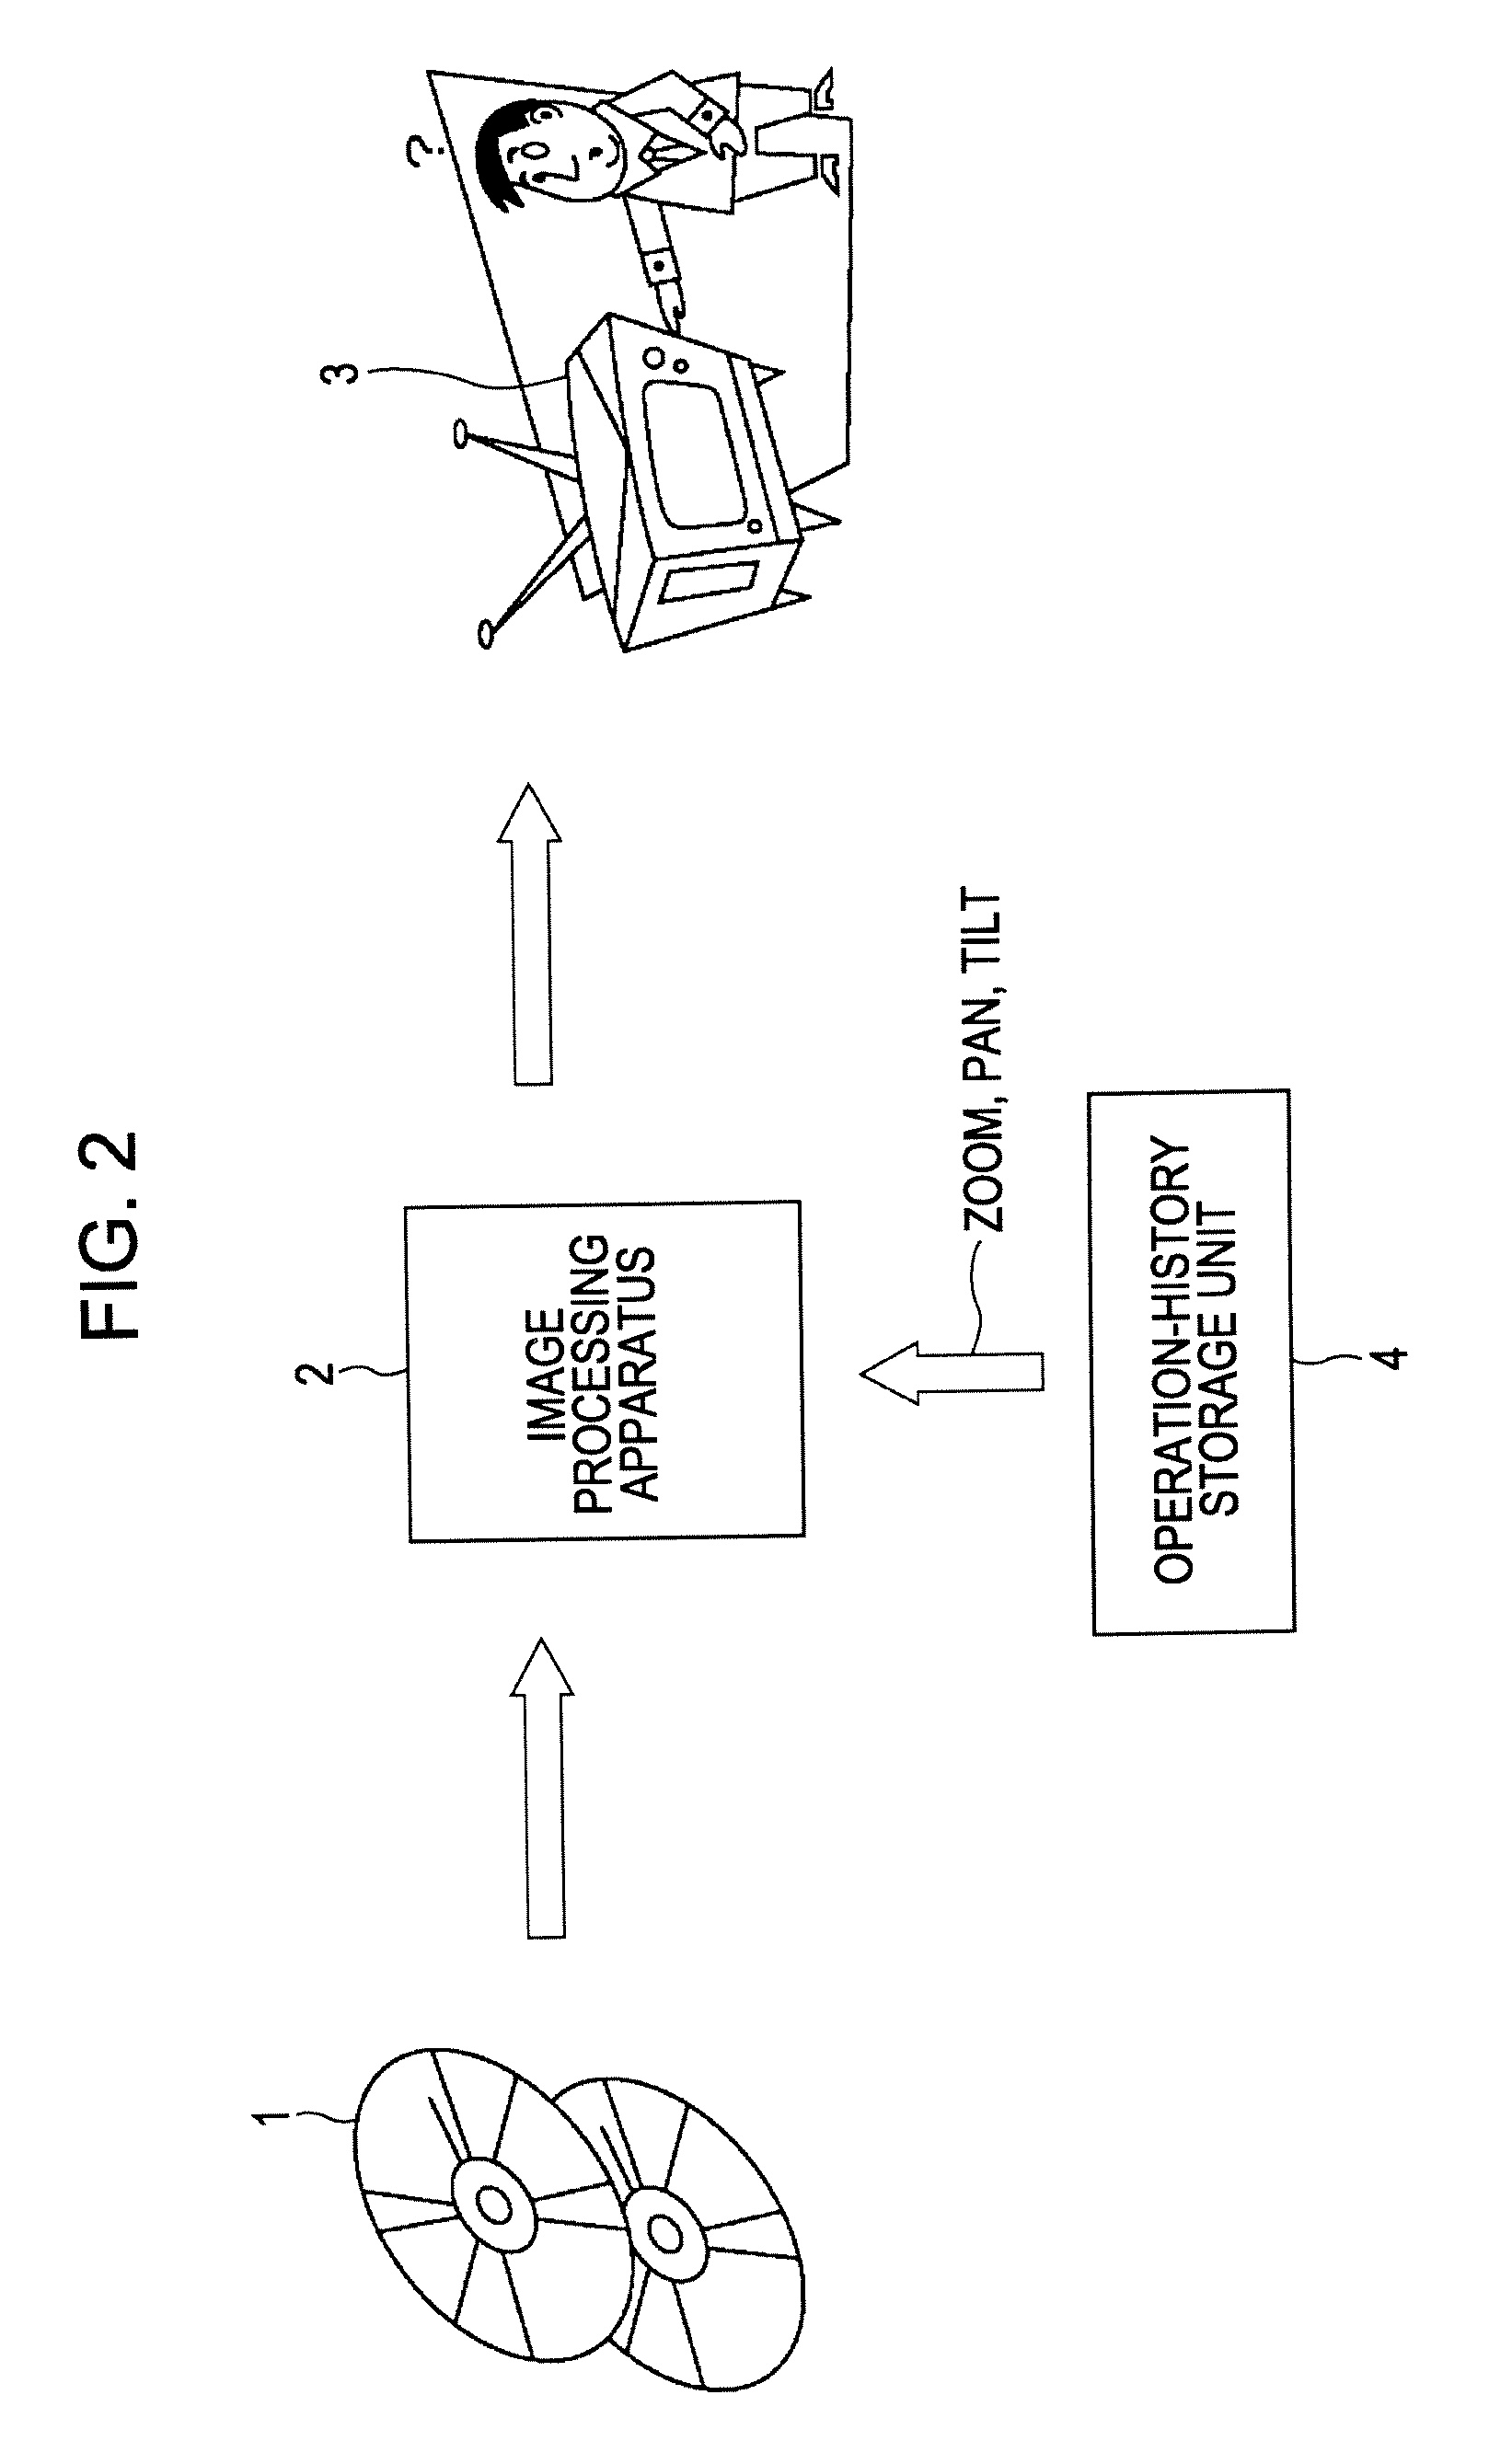 Image processing apparatus and method, data recording medium, program recording medium, and program therefor